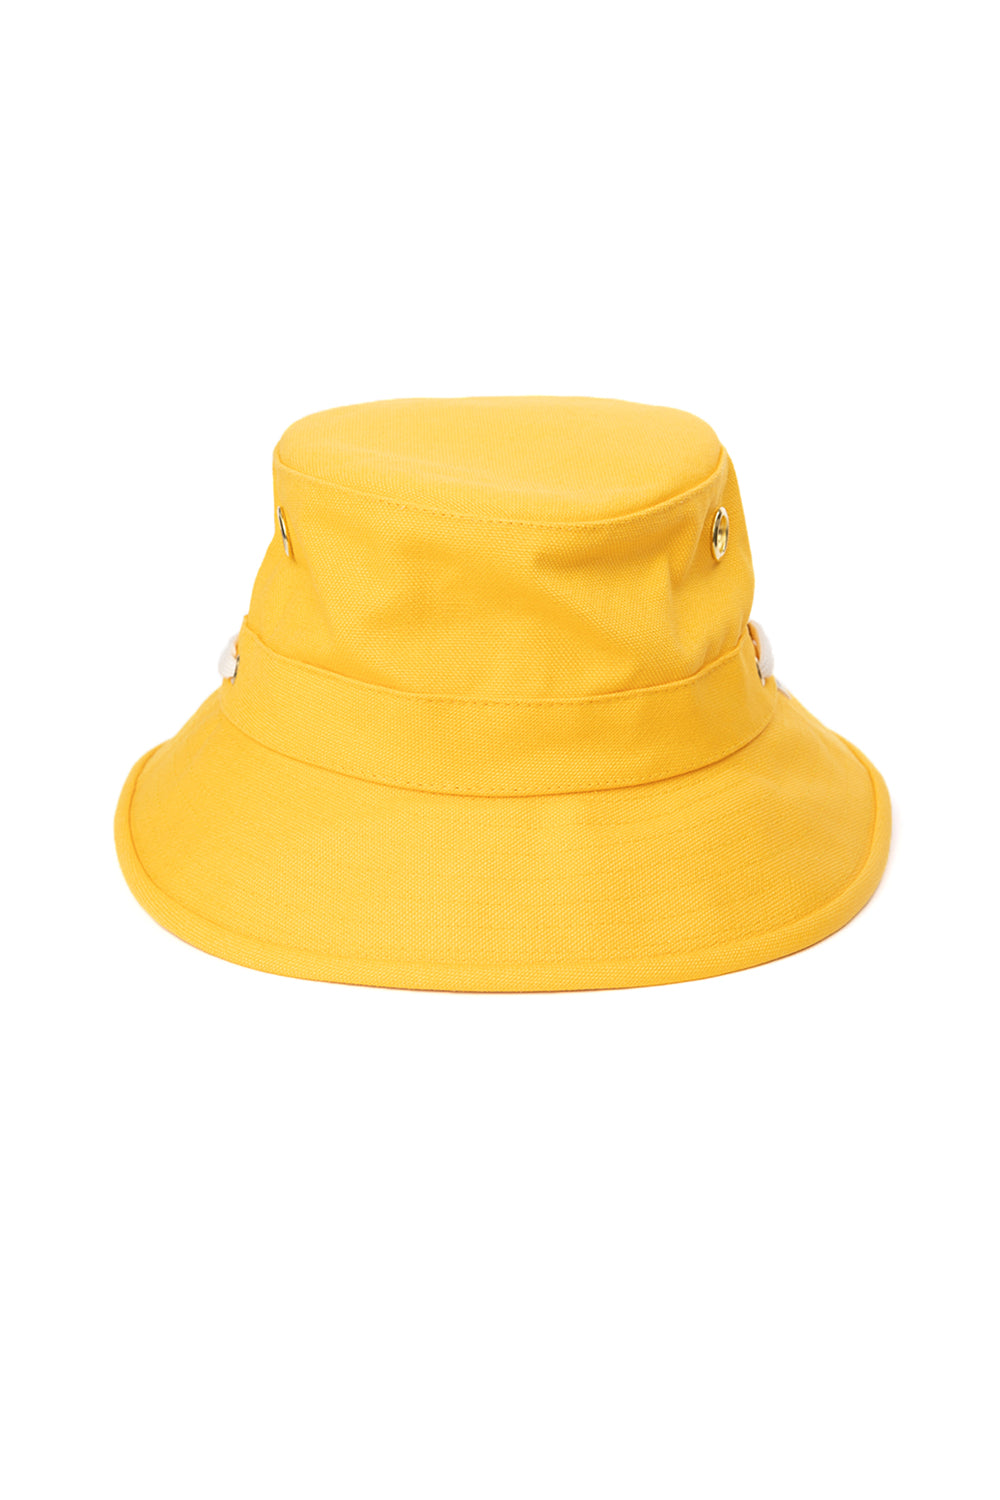 The Iconic T1 Bucket Hat Accessories Tilley   